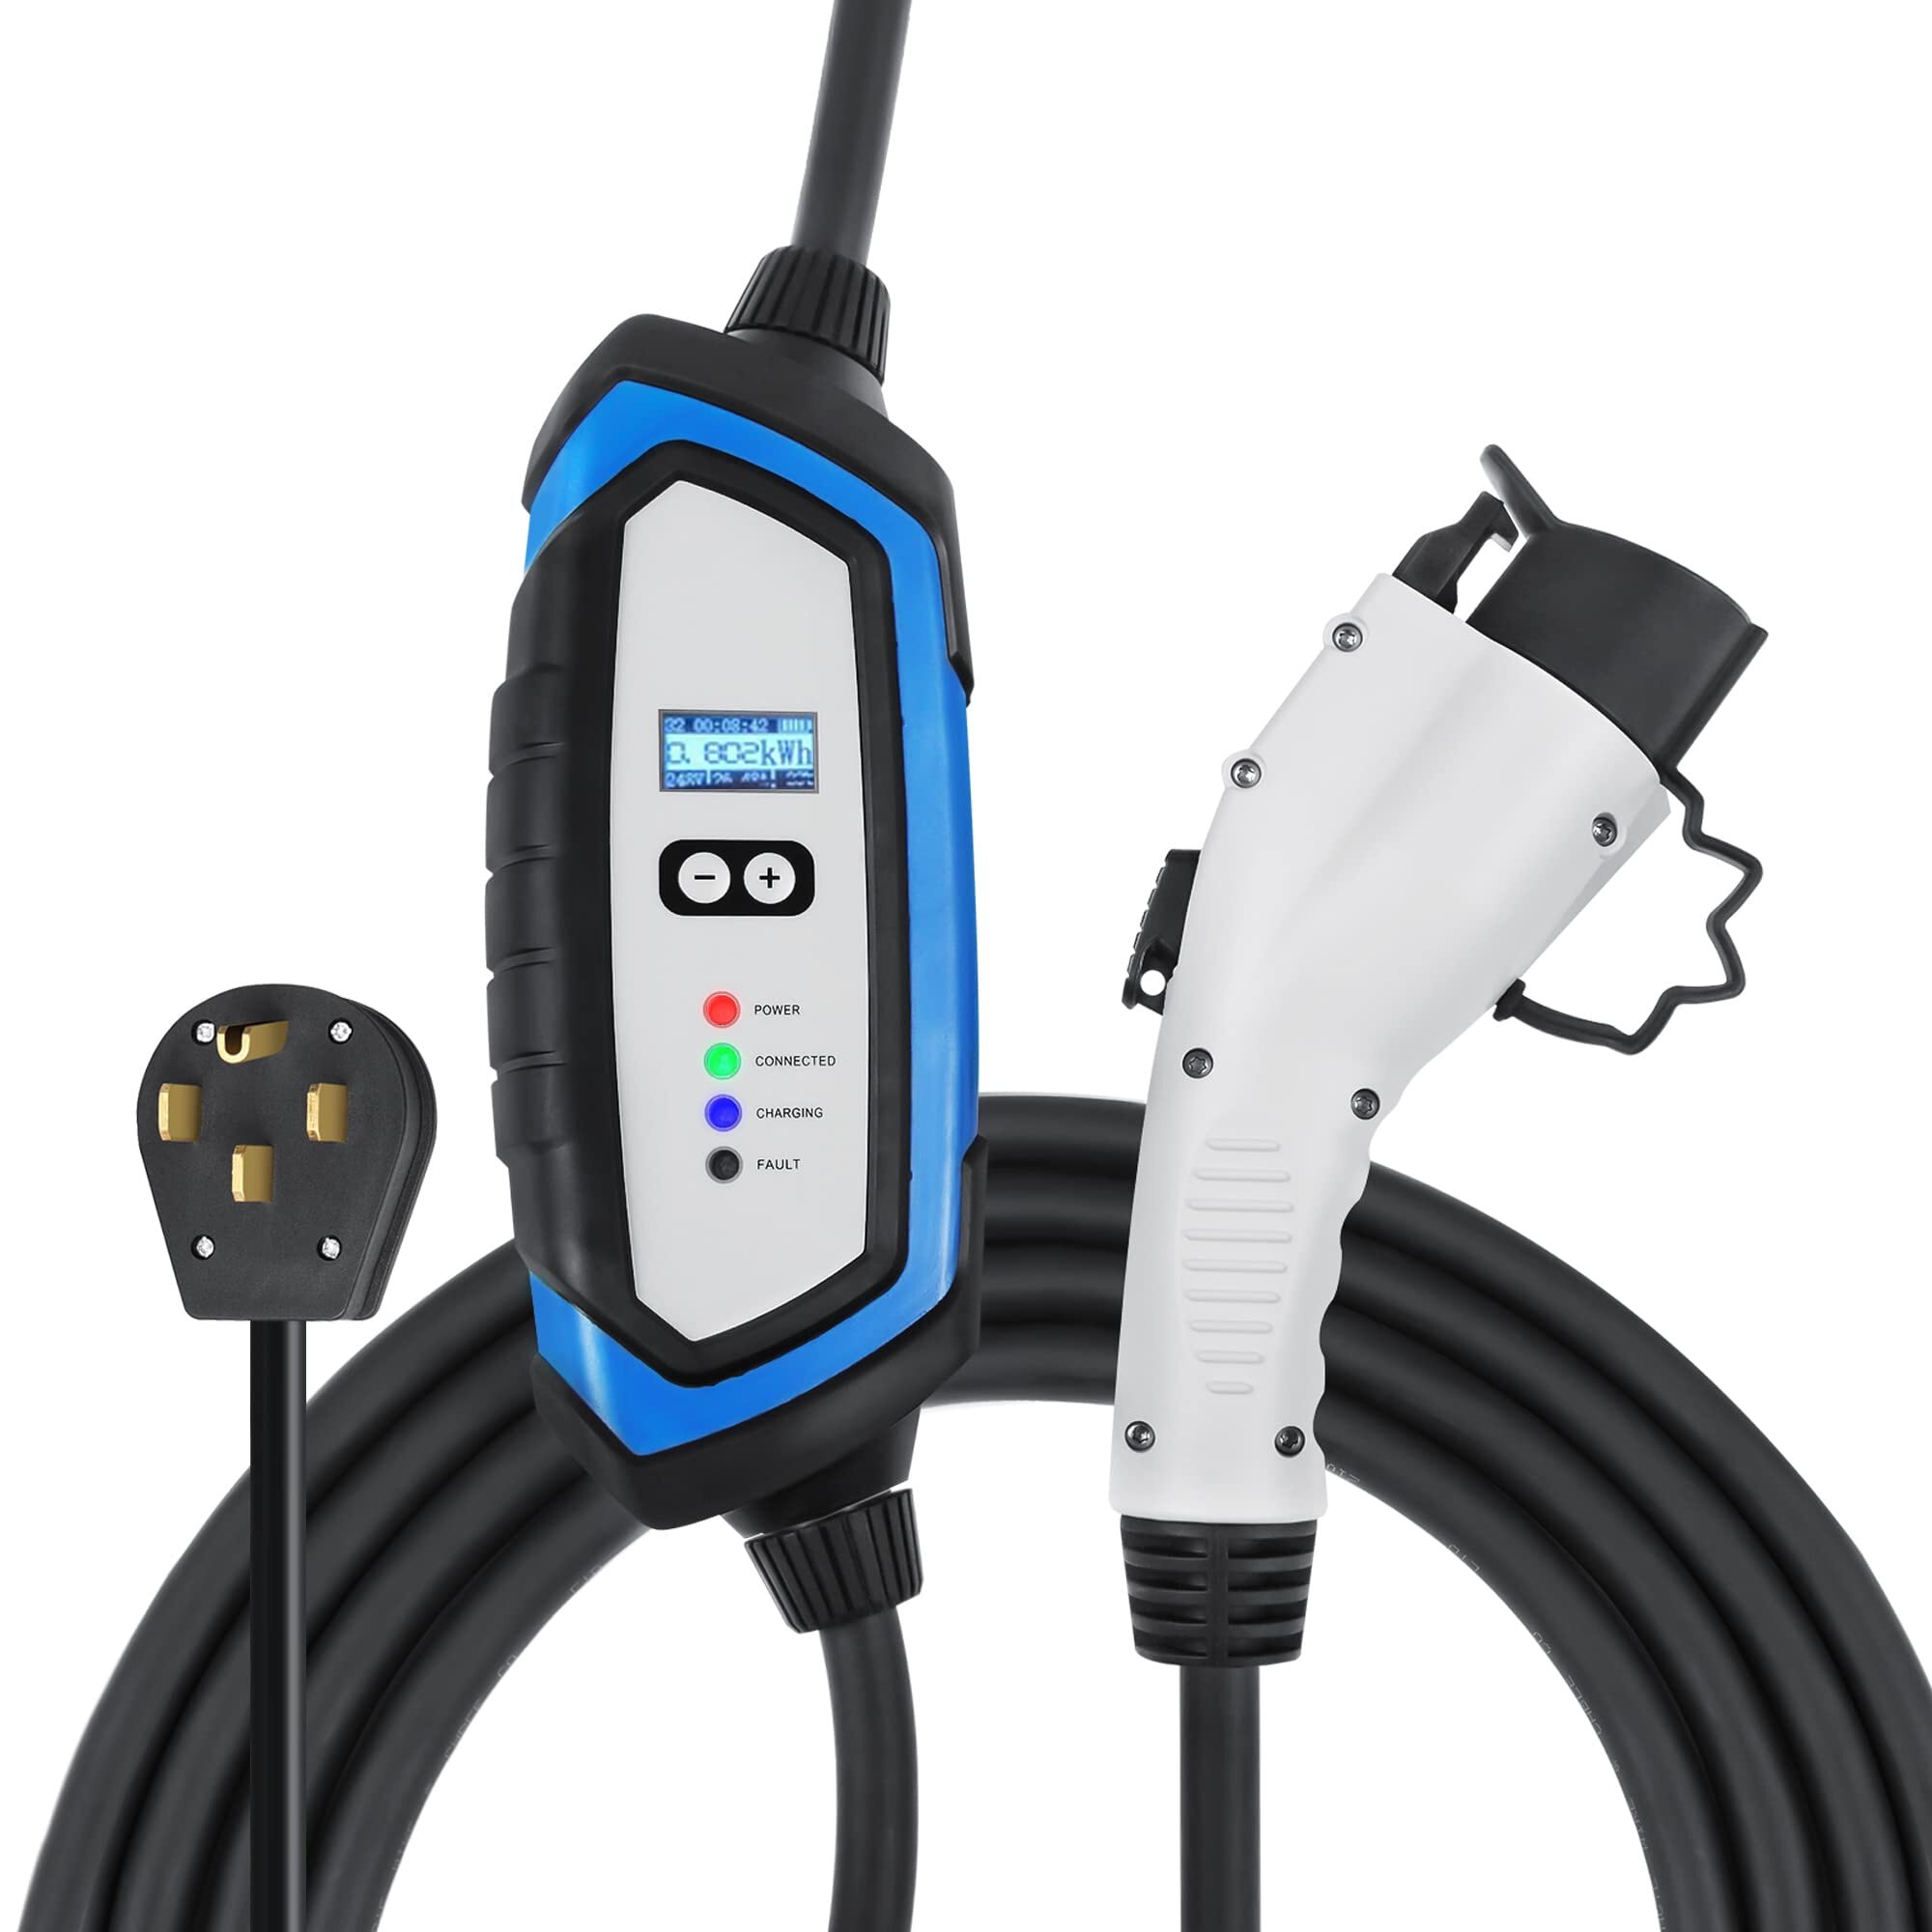 Charging cable for your electric car with type 2 socket